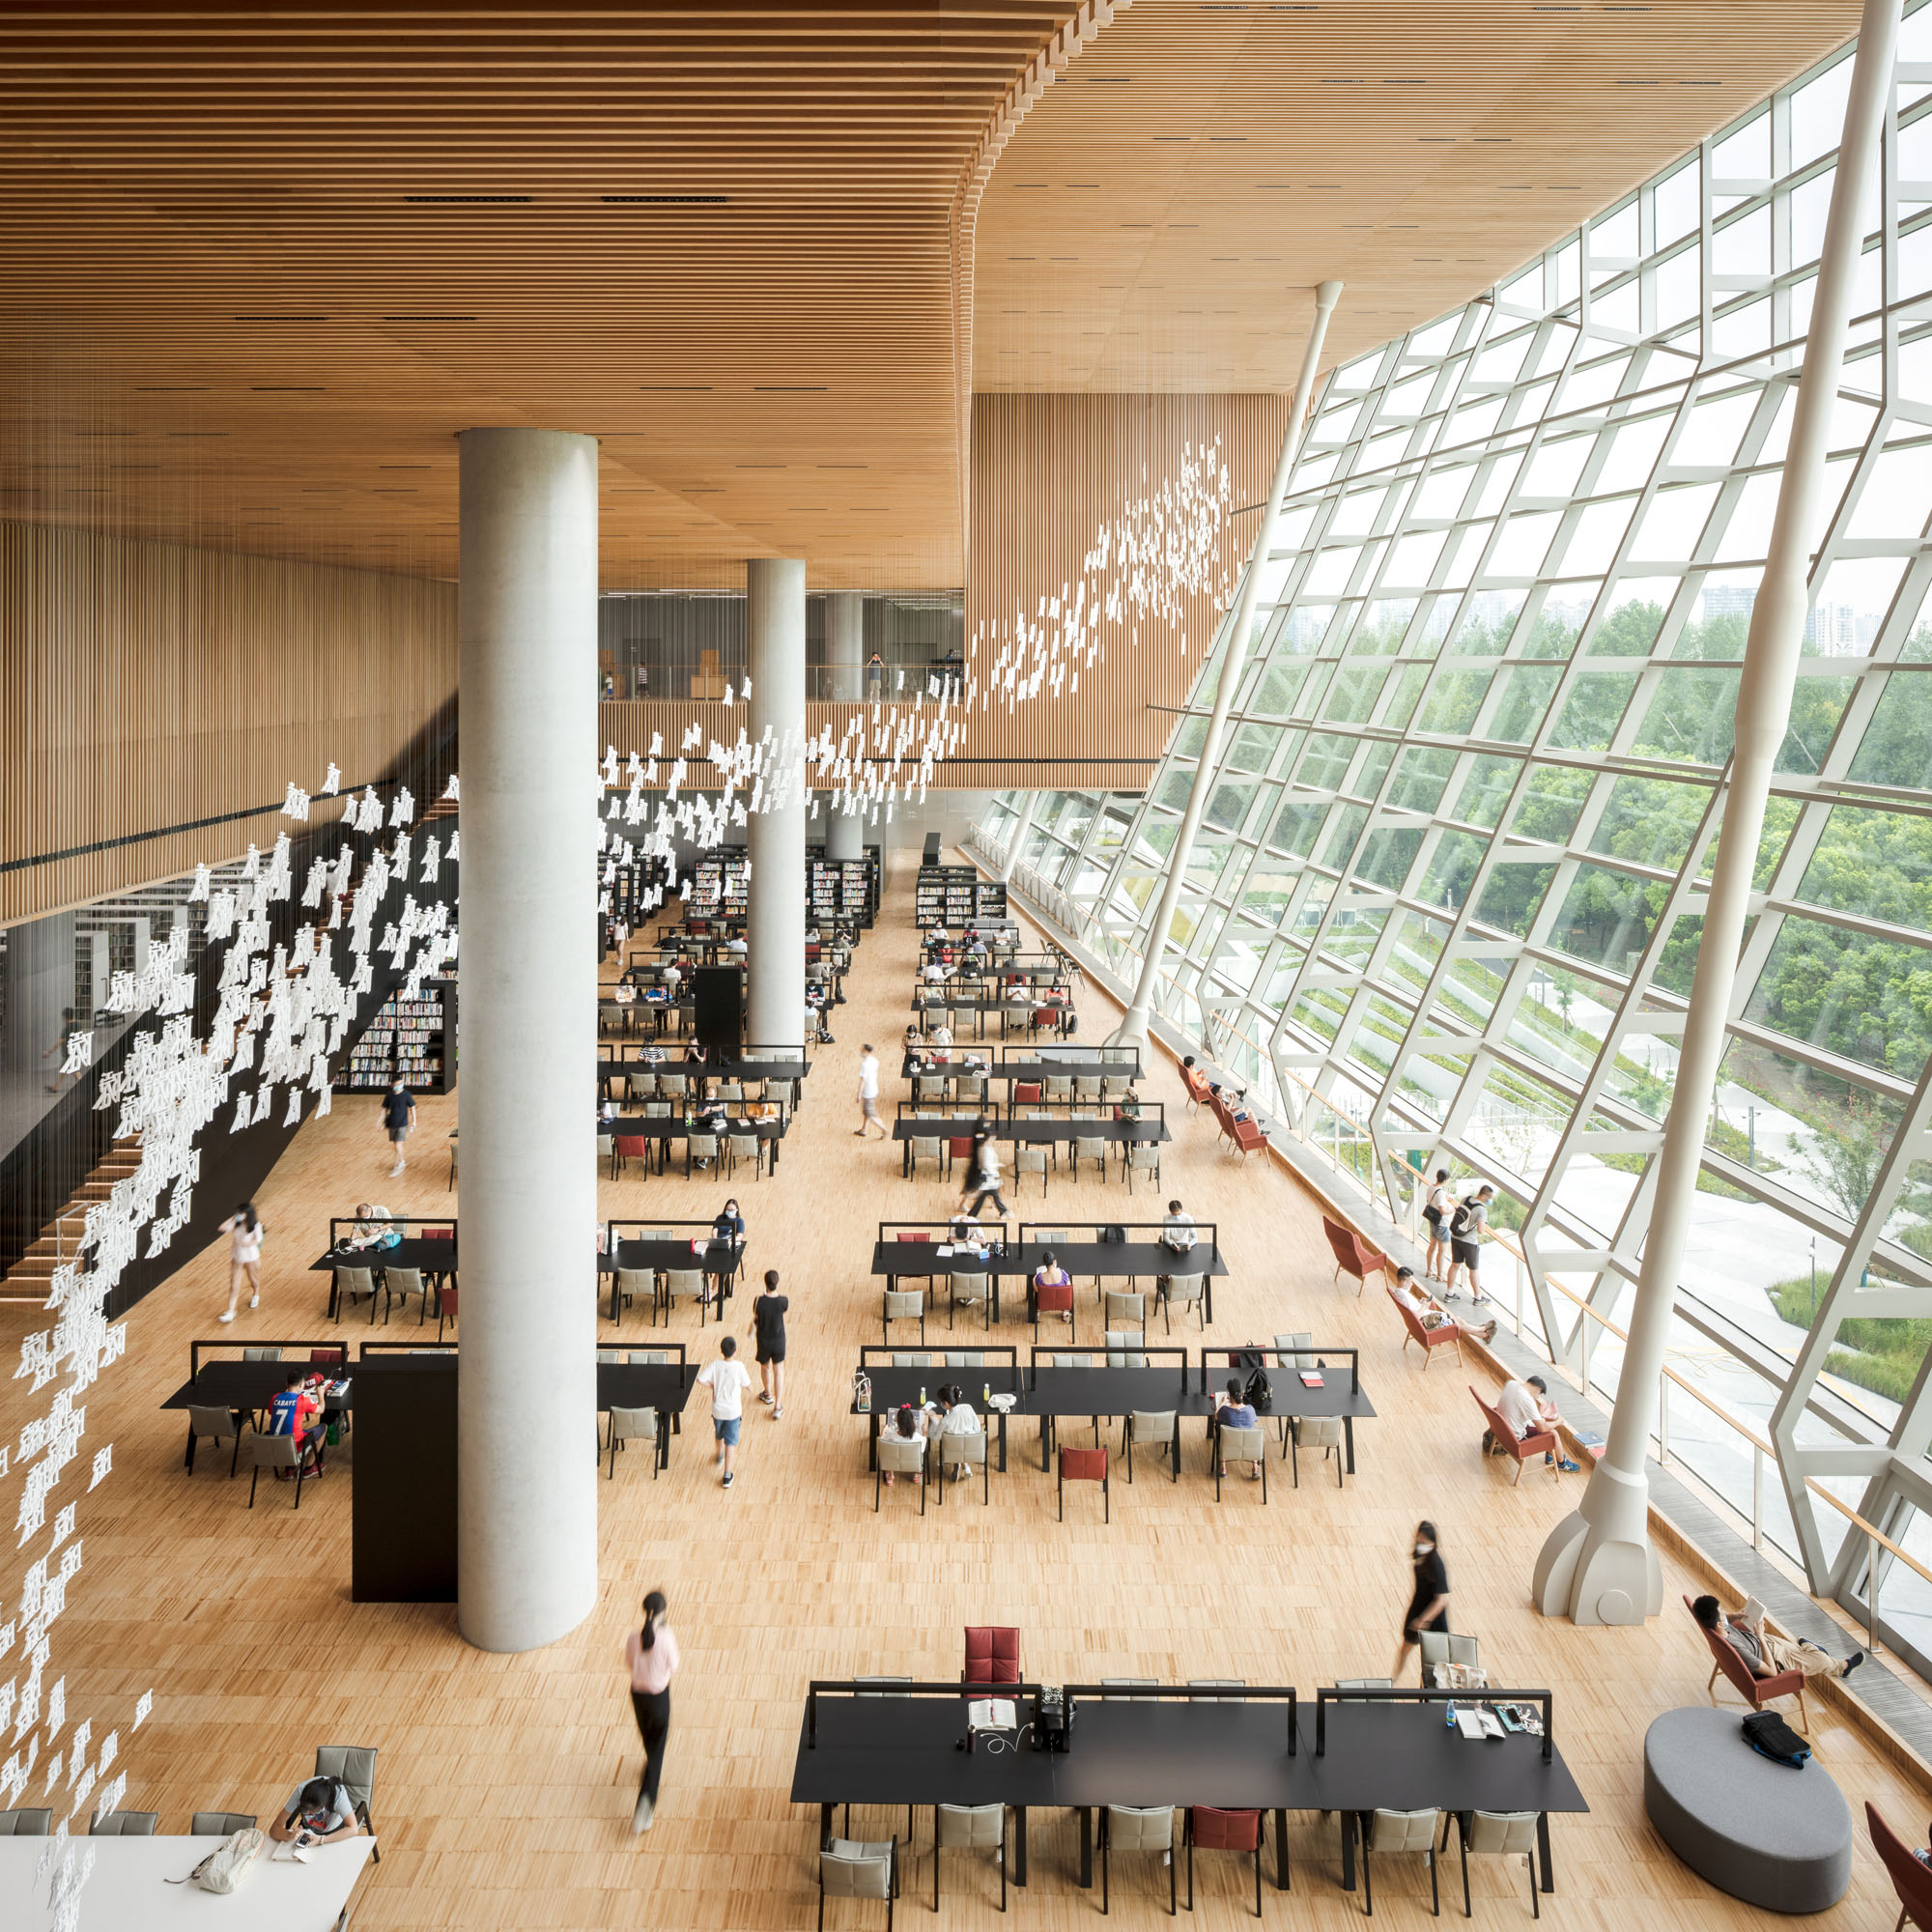 Th interior atrium of the Shanghai Library East with wide views of the surrounding park